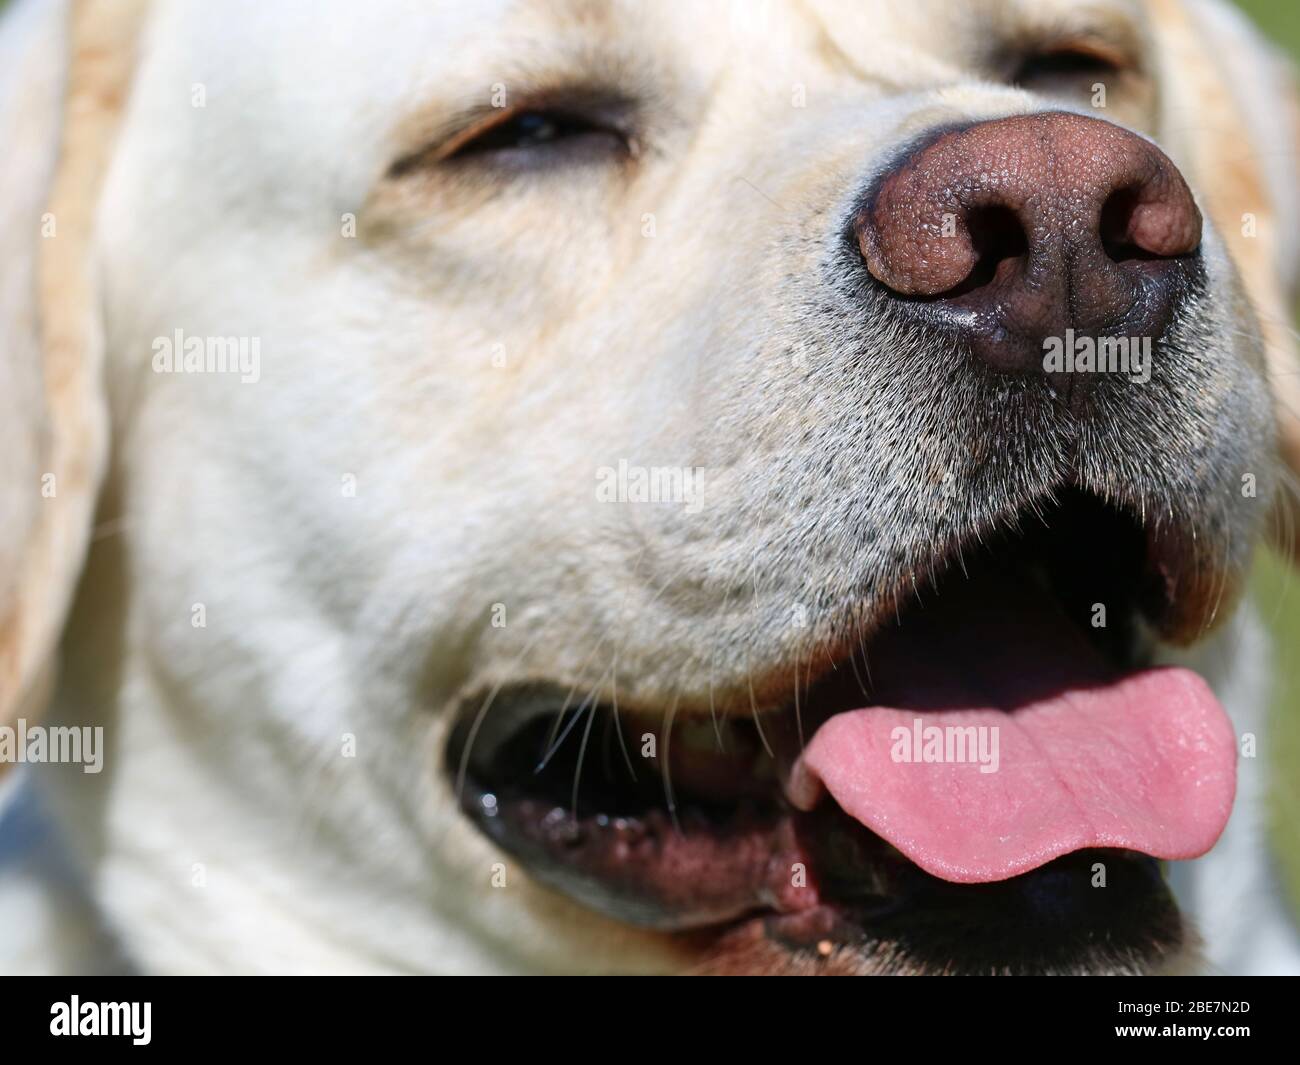 nose and tongue of a white dog, close up, labrador sweats in the summer heat and cools down by panting Stock Photo